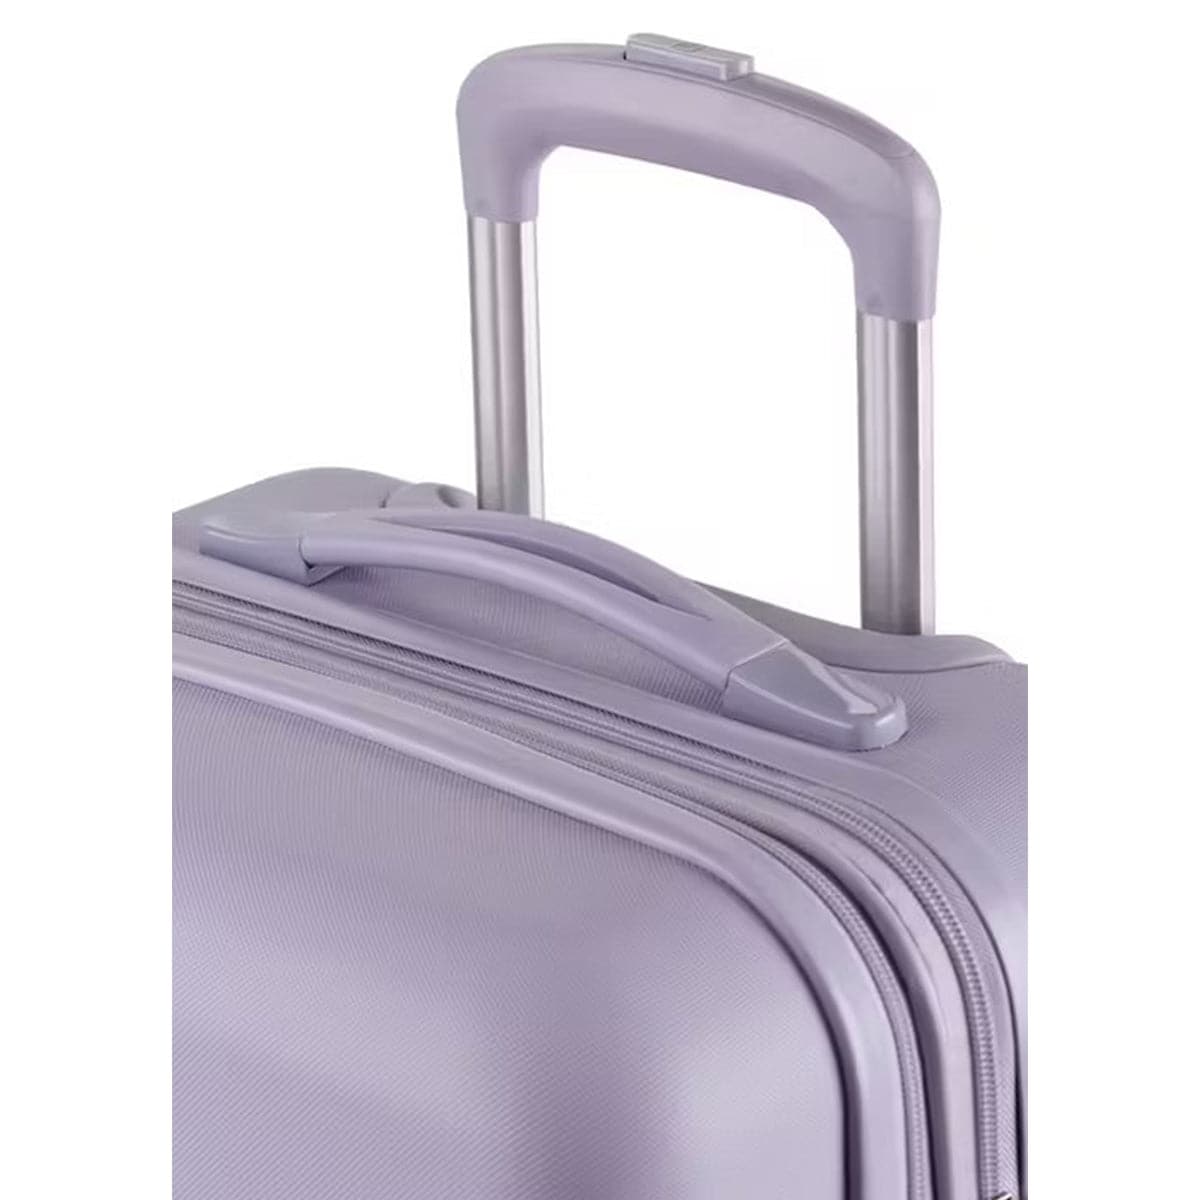 SwissGear 7366 18" Expandable Carry On Hardside Spinner Luggage